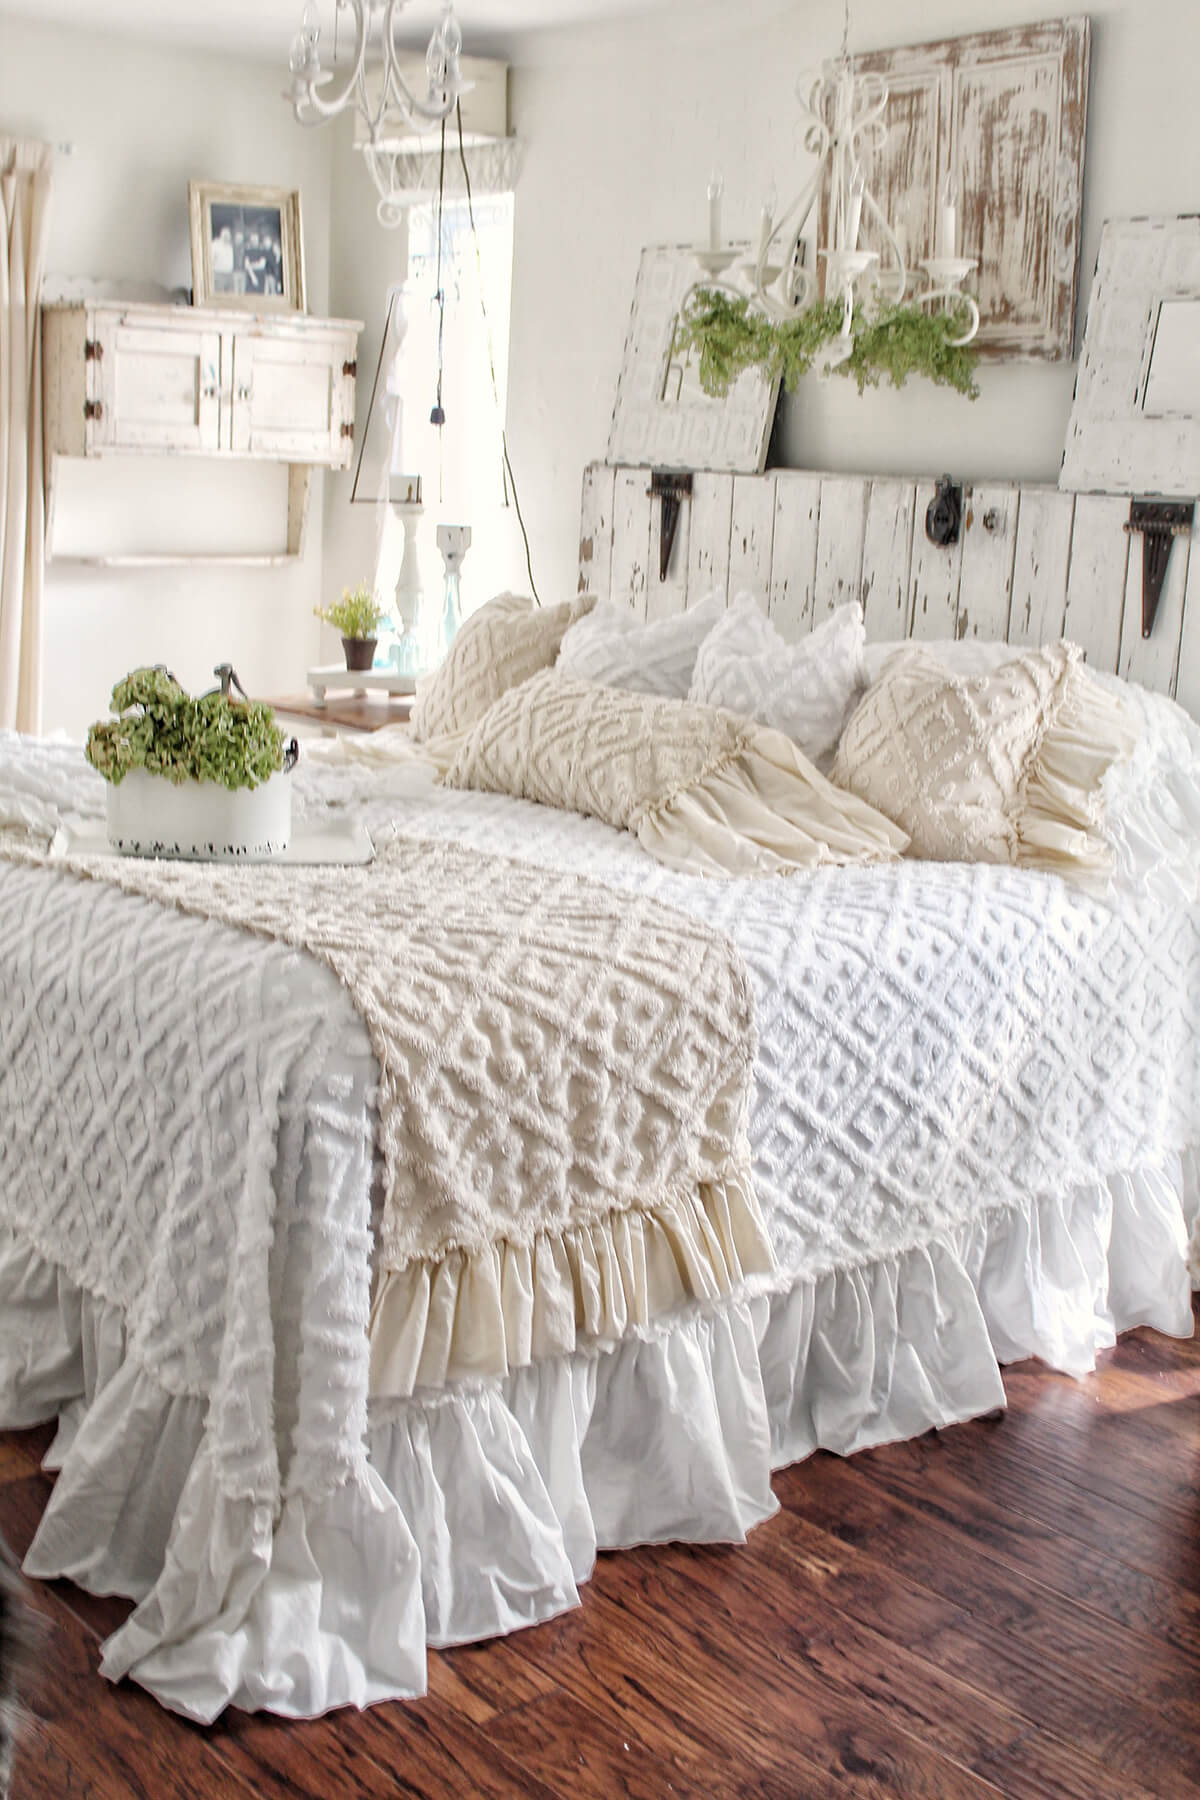 14 Best Rustic Chic Bedroom Decor and Design Ideas for 2020